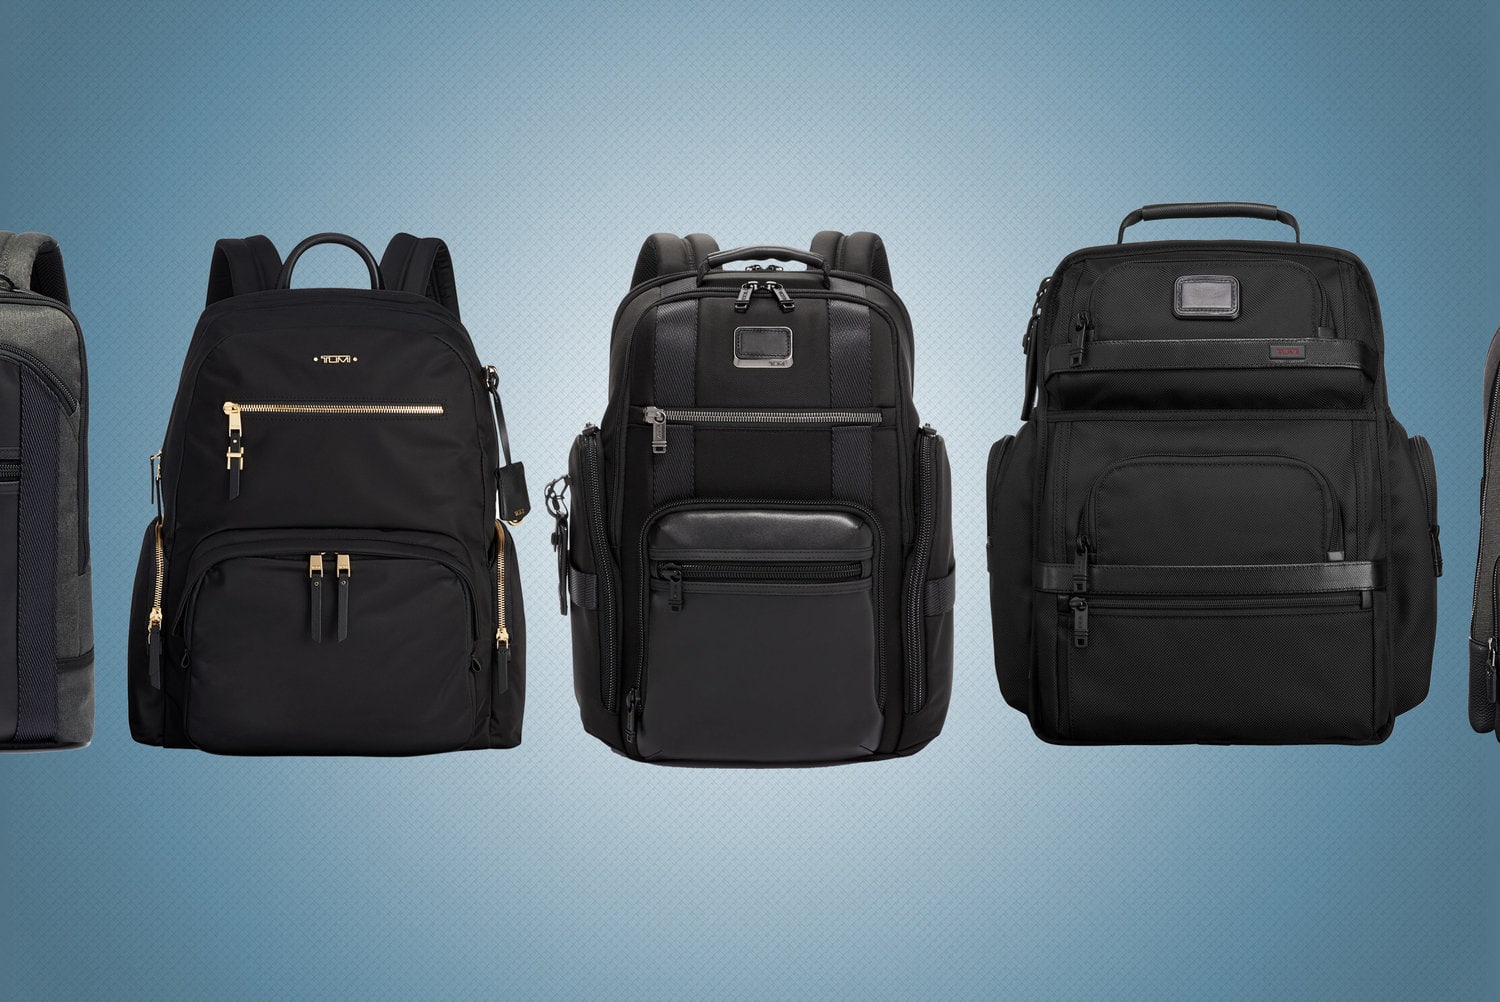 Tumi is Best Backpack Brands